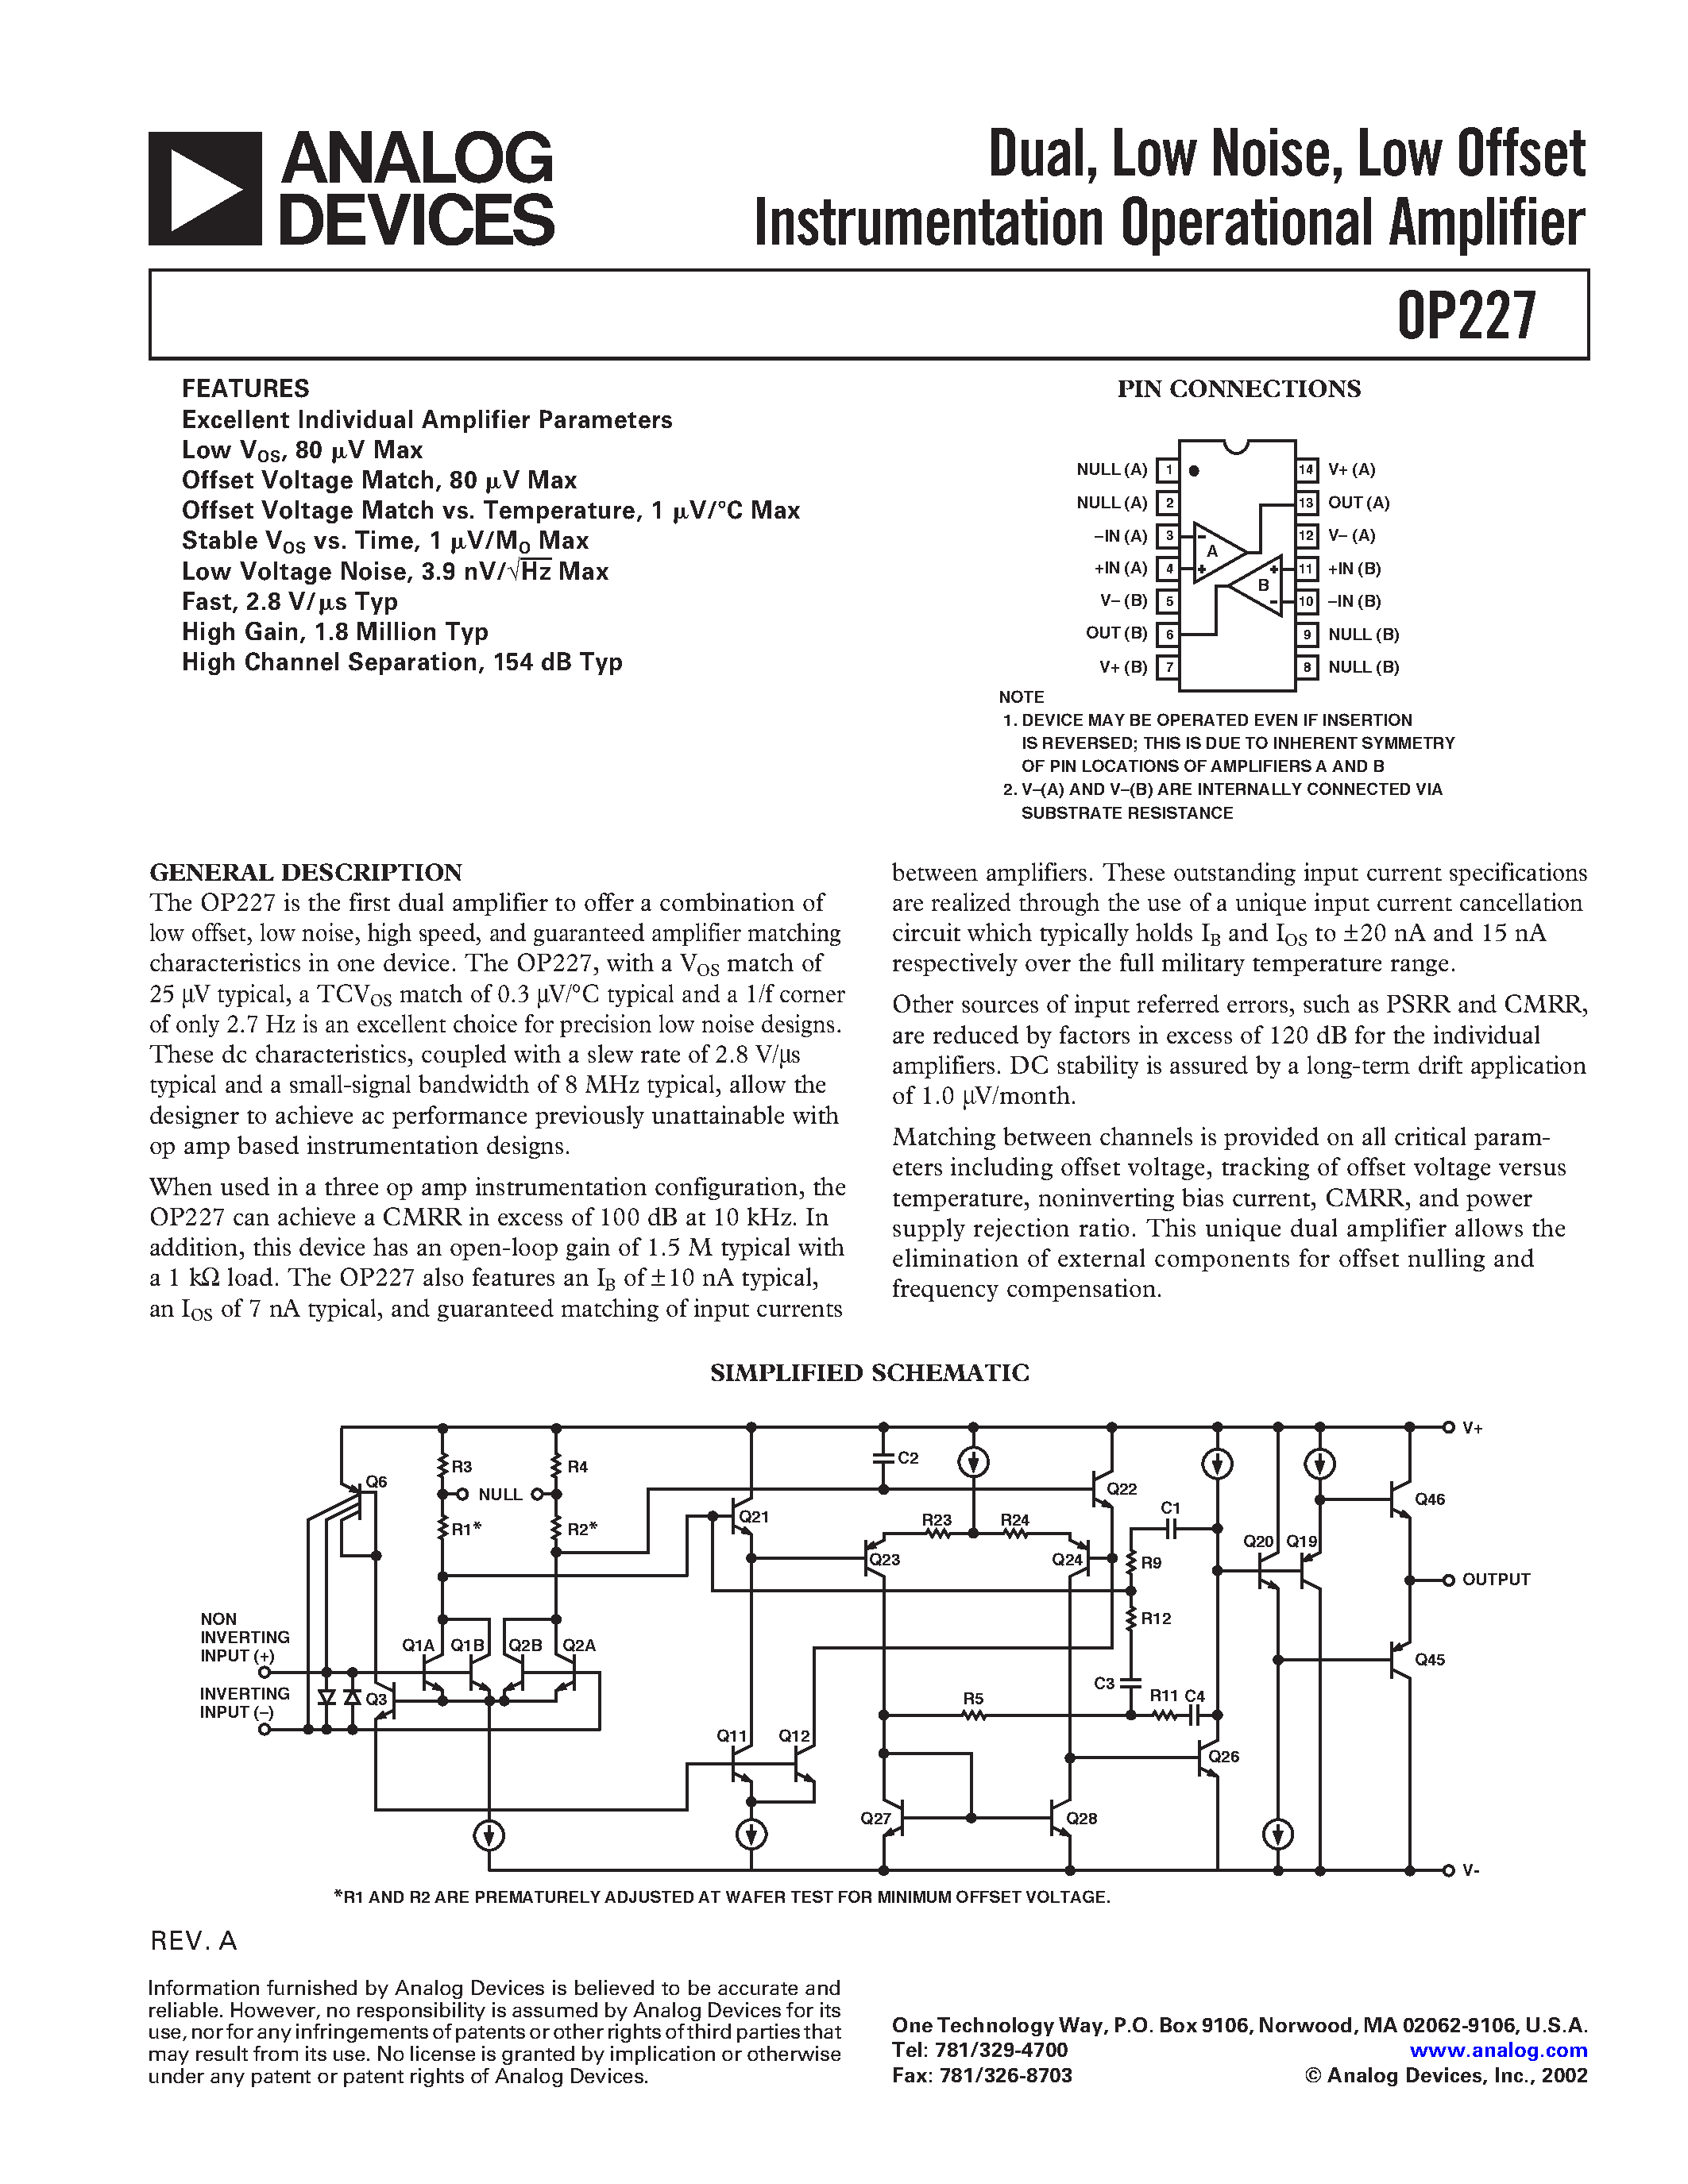 Datasheet OP227 - Dual / Low Noise / Low Offset Instrumentation Operational Amplifier page 1